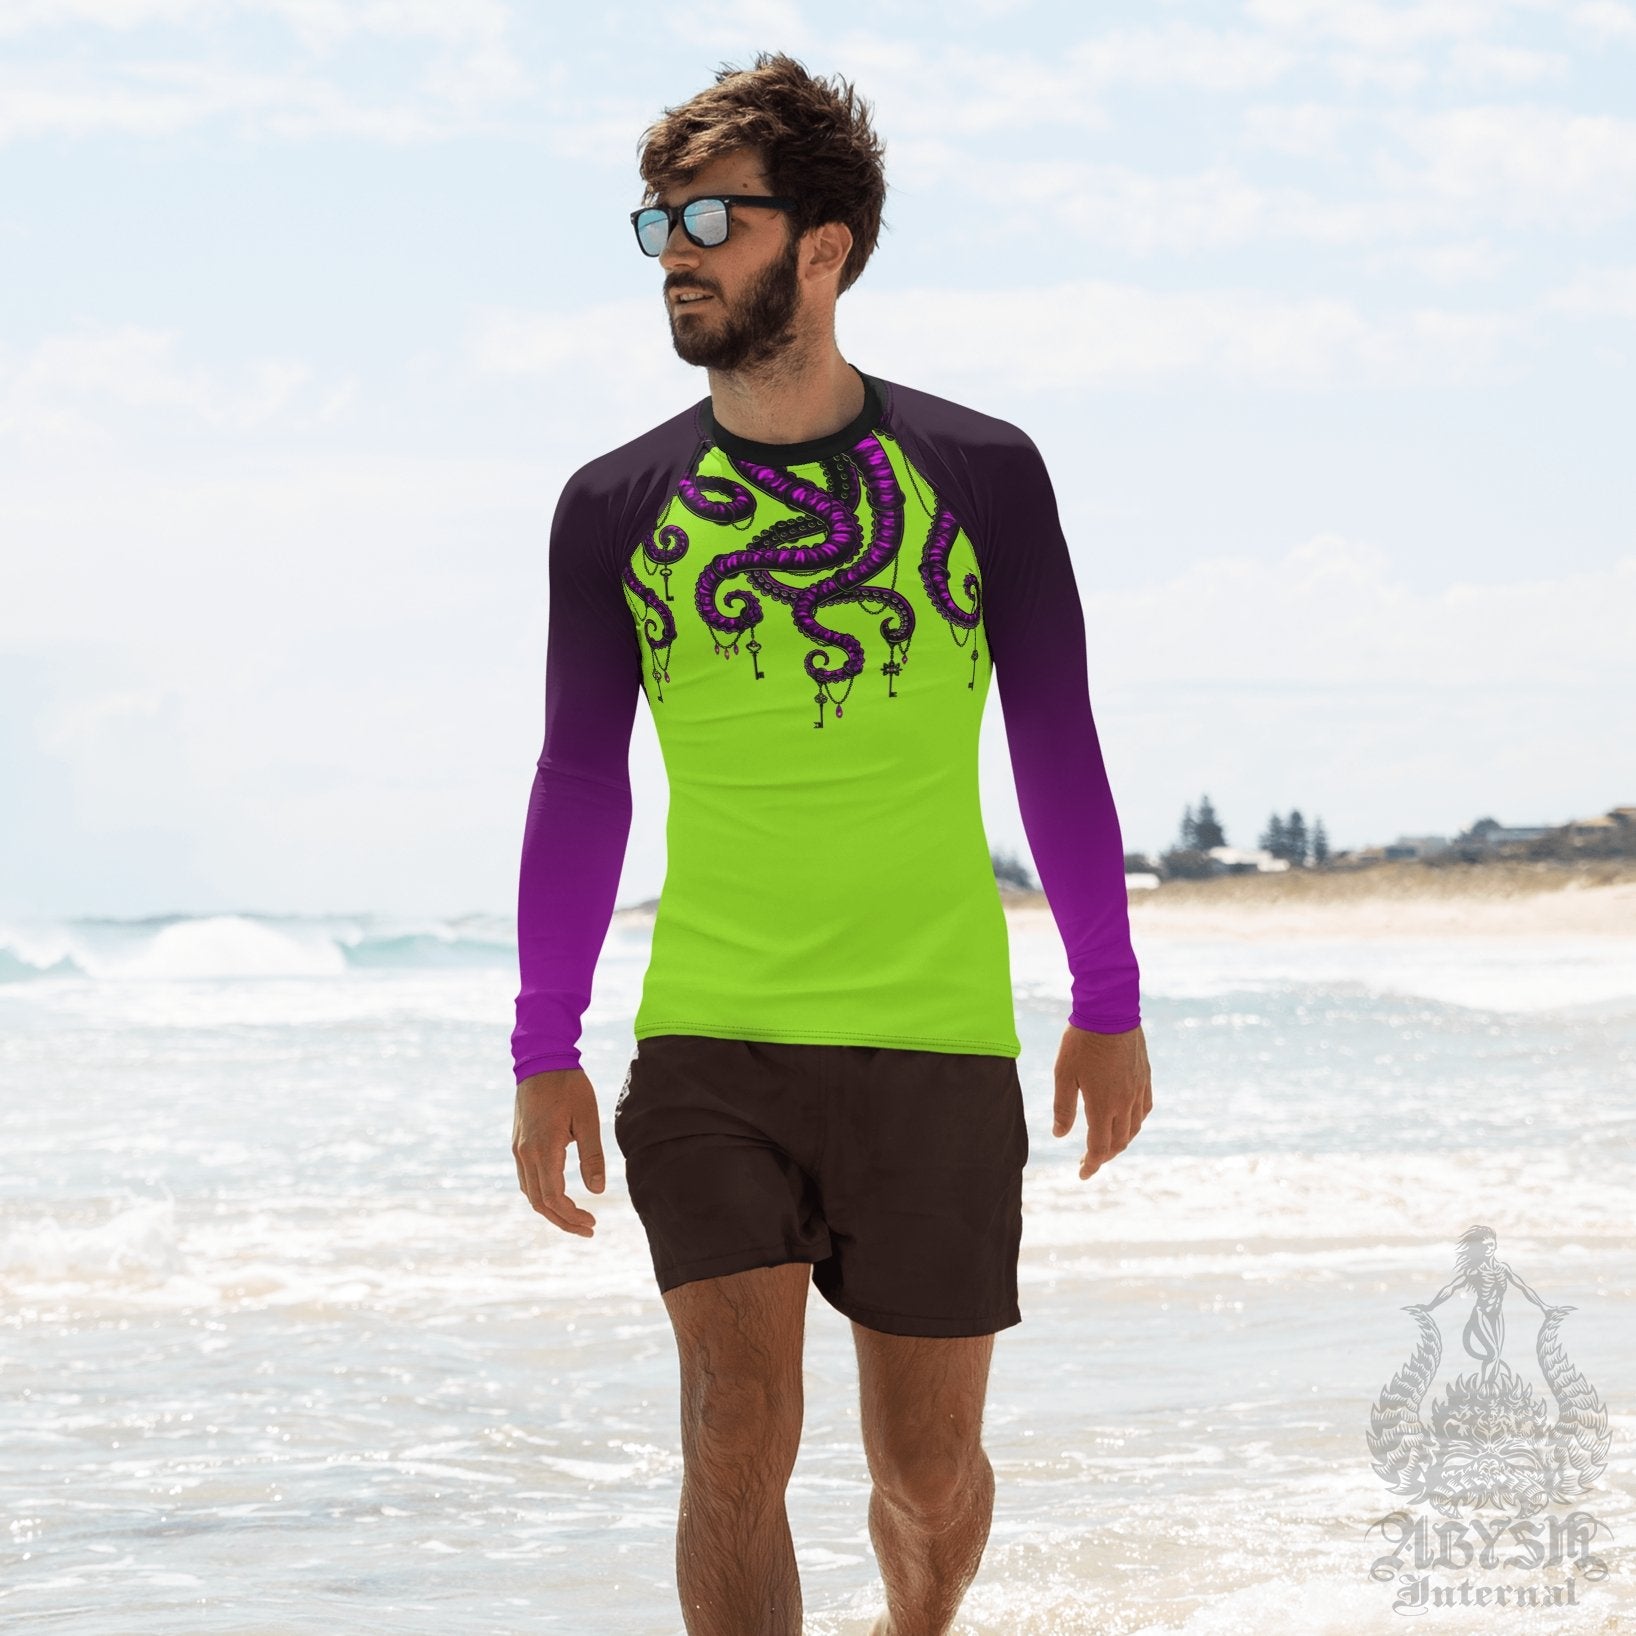 Green and Purple Men's Rash Guard, Long Sleeve spandex shirt for surfing, swimwear top for water sports - Octopus - Abysm Internal